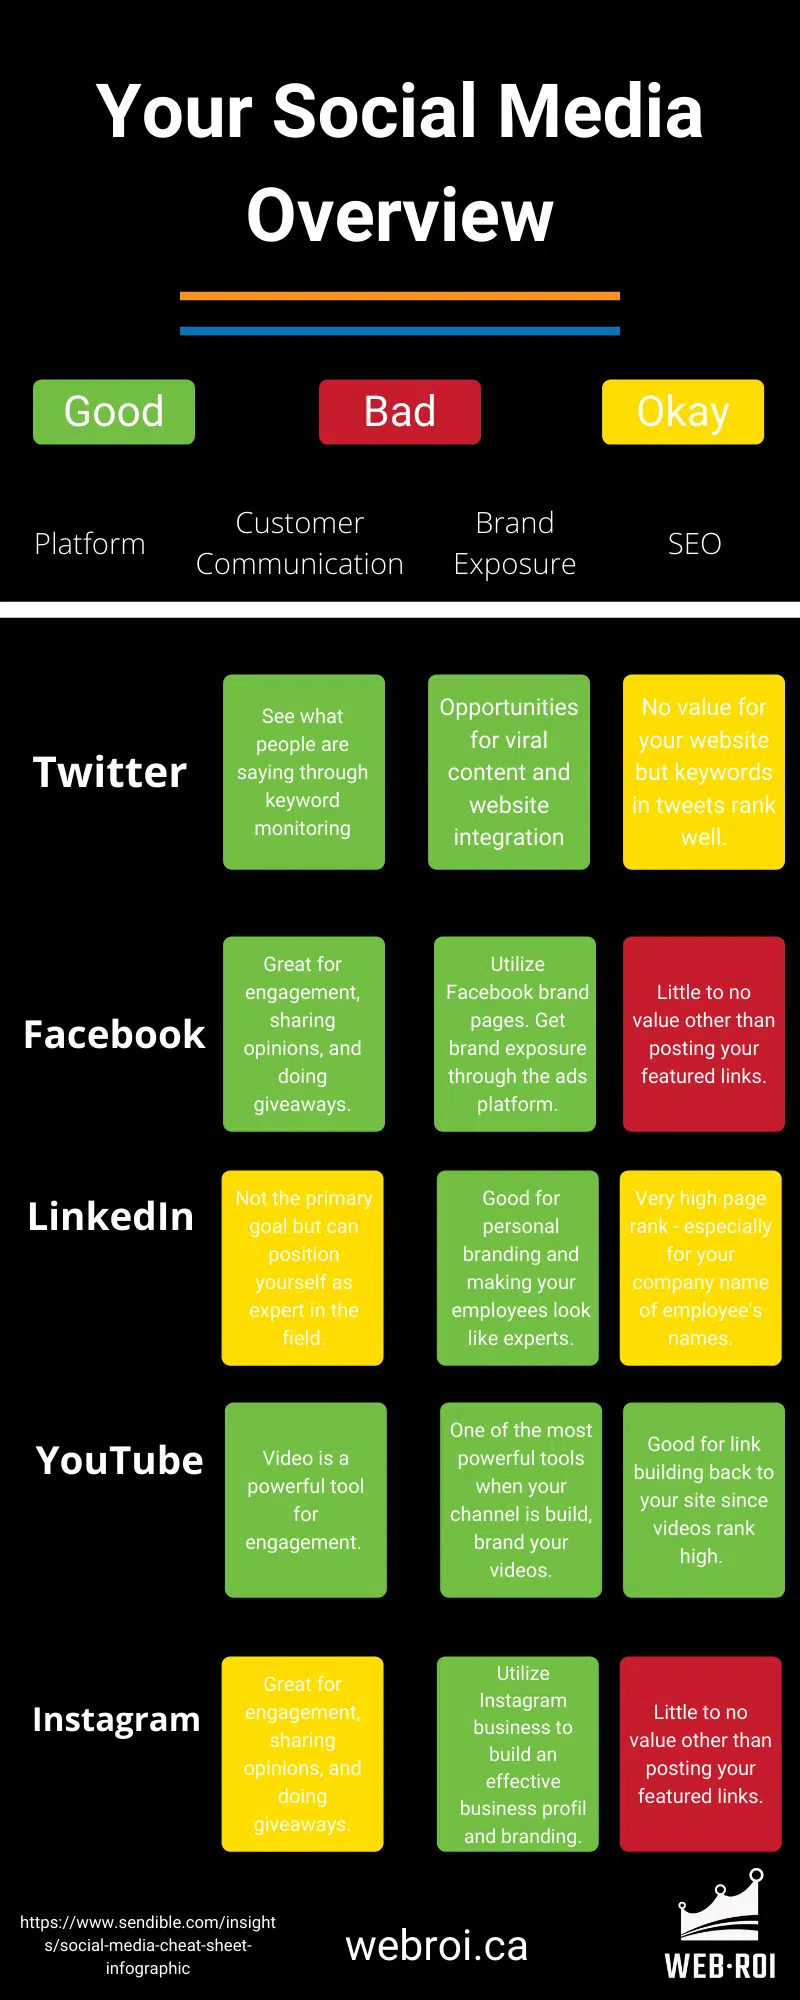 How to Best Leverage Social Media